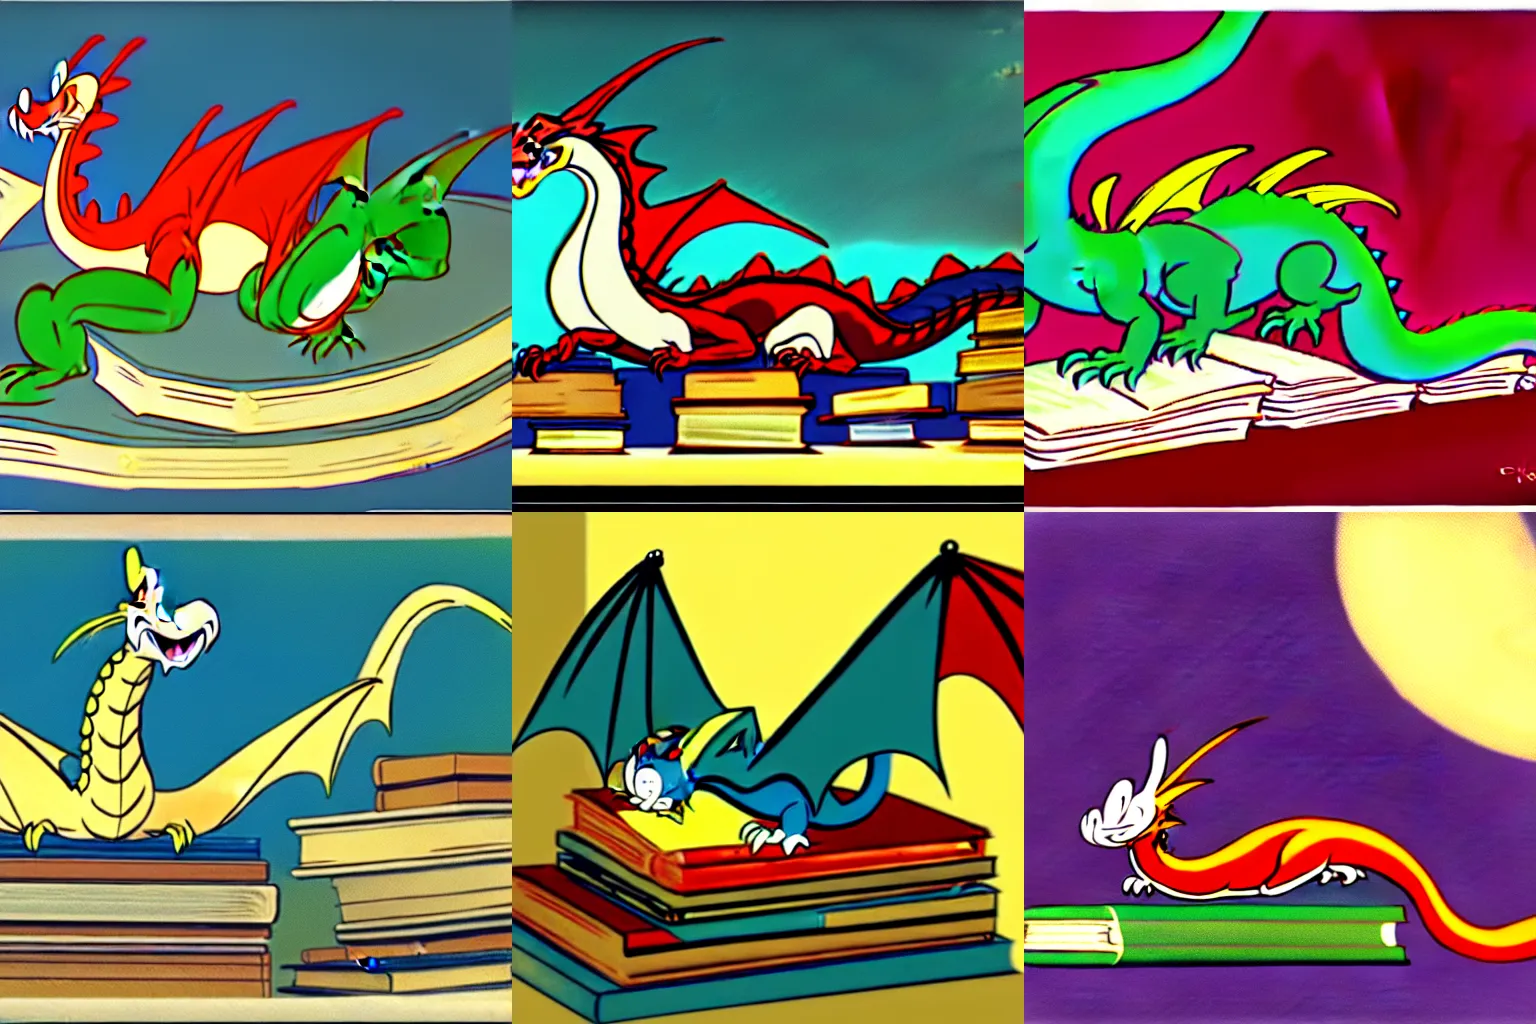 A huge dragon sleeping on a hoard of books, by Frank, Stable Diffusion